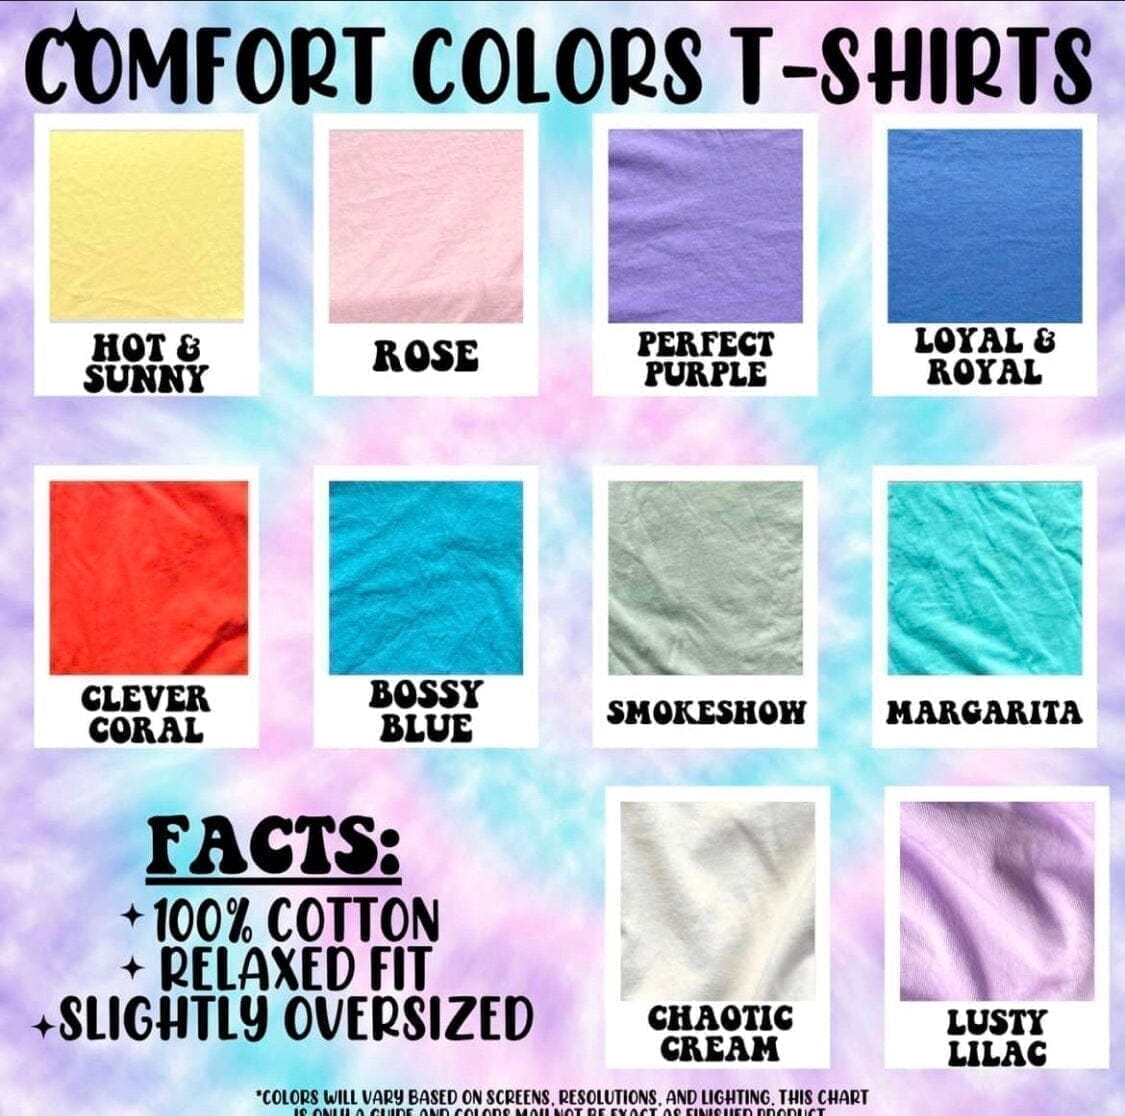 Completely Unhinged Comfort Colors Tee funny graphic tee Poet Street Boutique S MARGARITA 